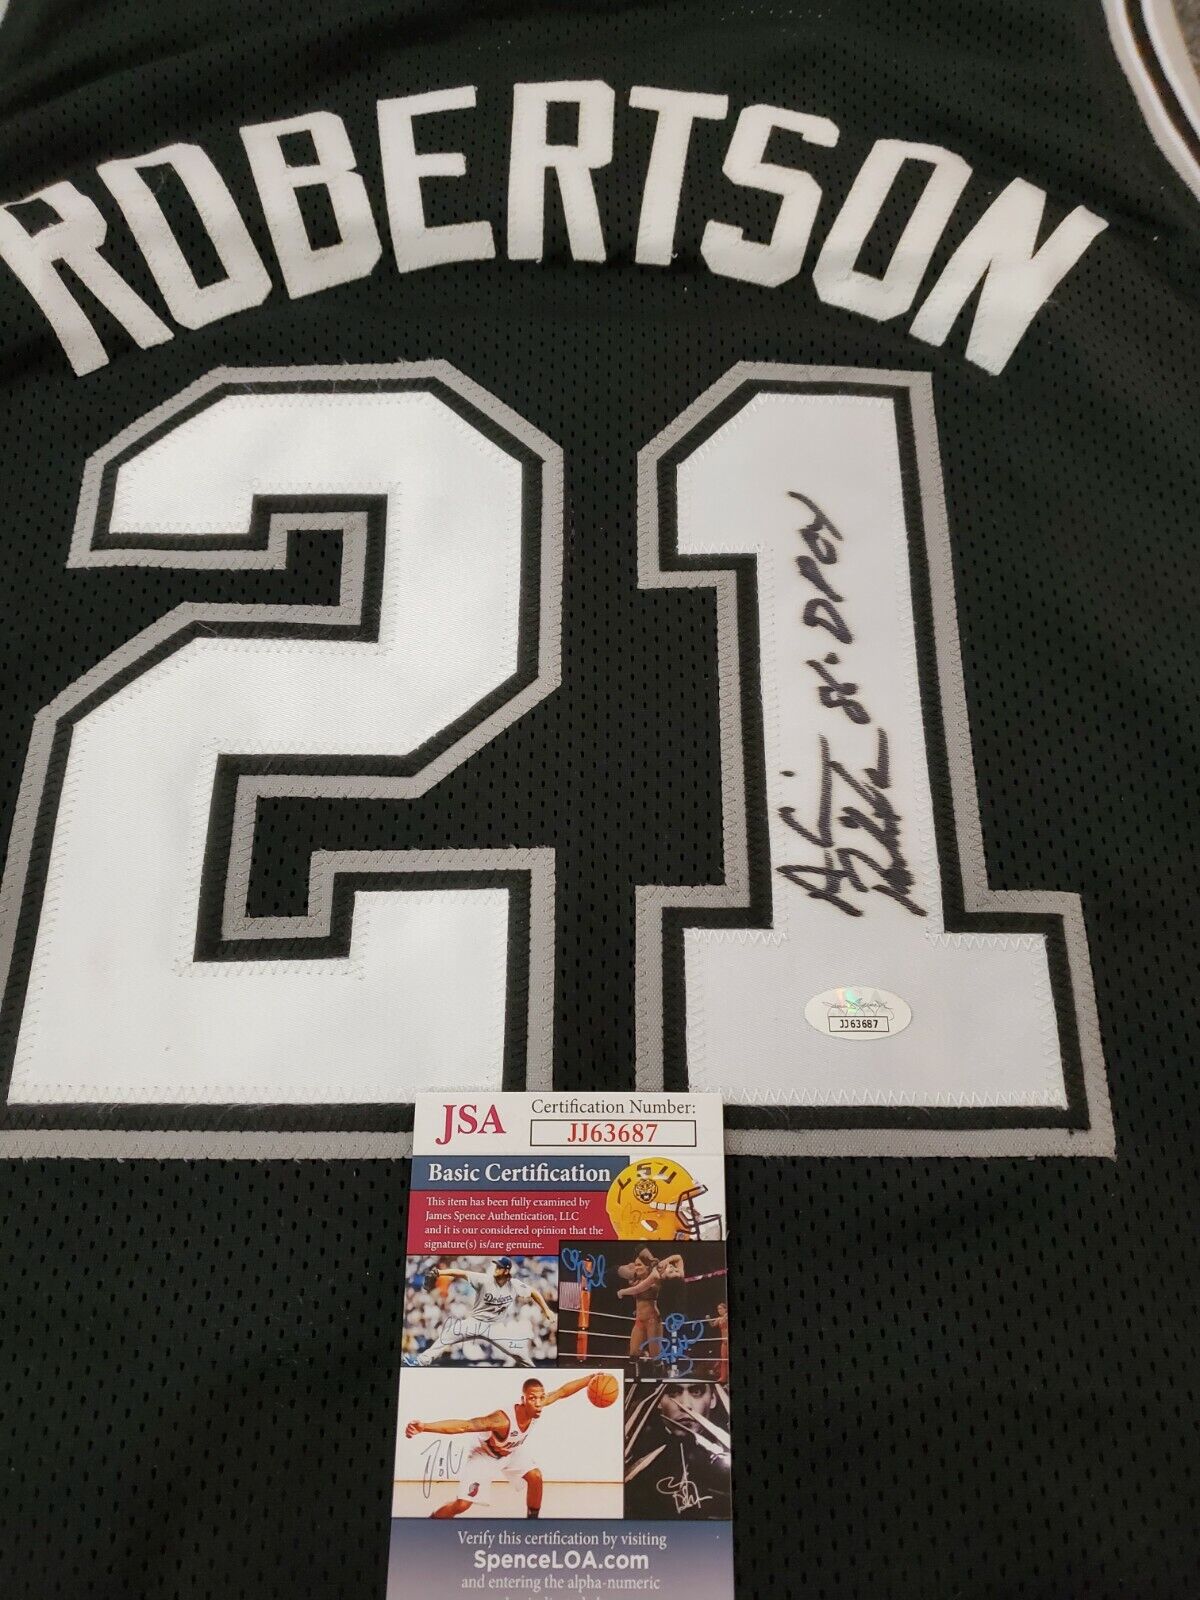 duncan signed jersey